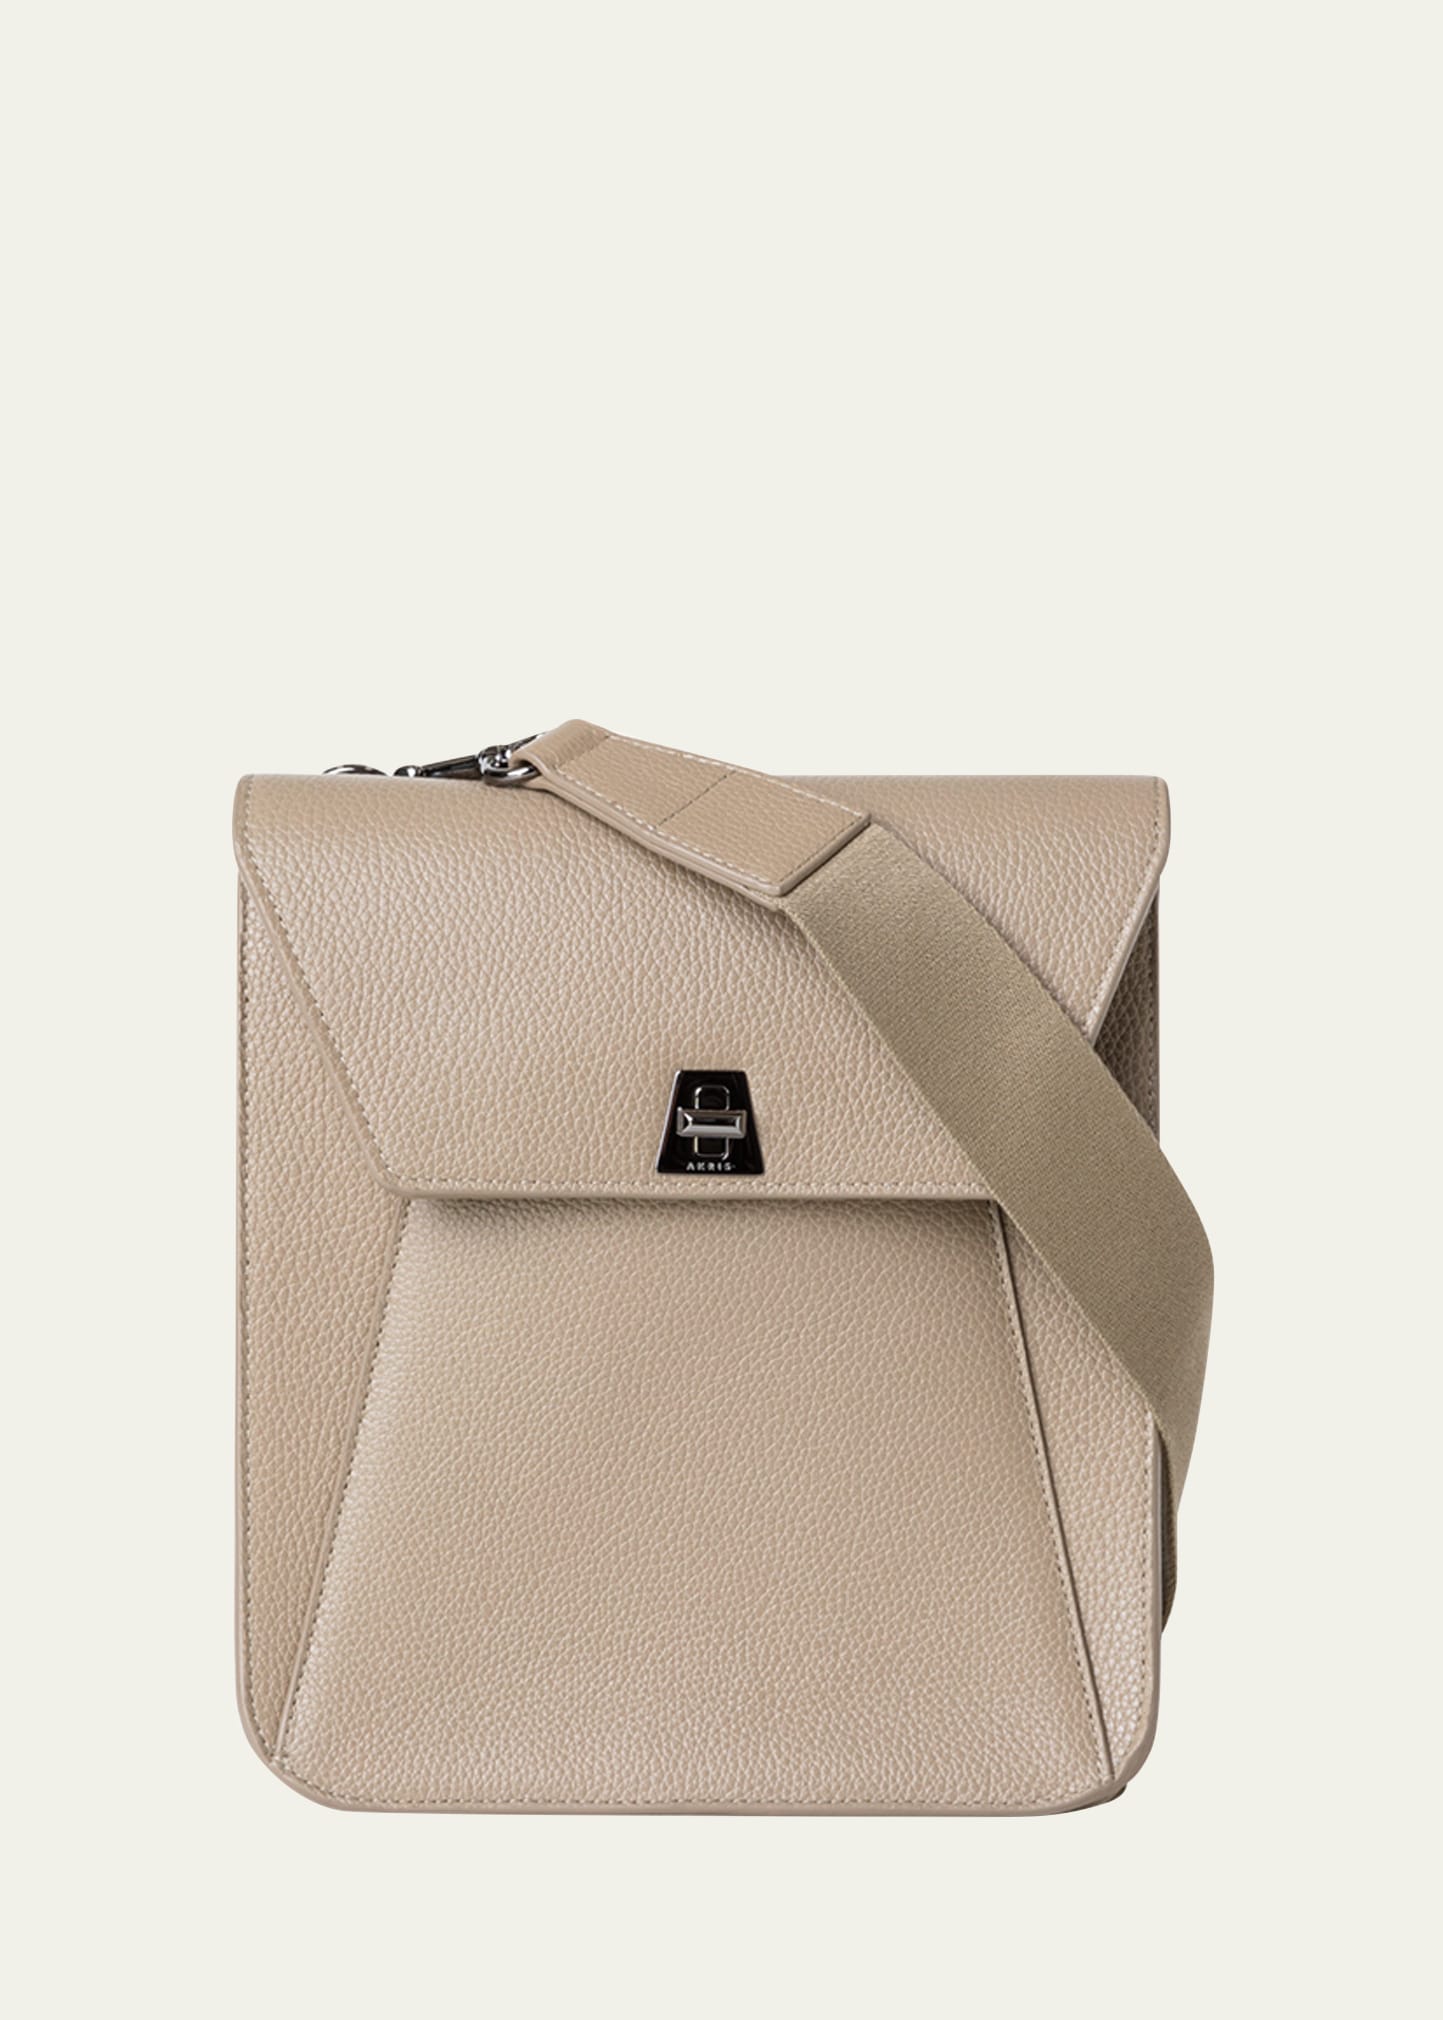 Akris Anouk Small Leather Messenger Bag In Seagrass